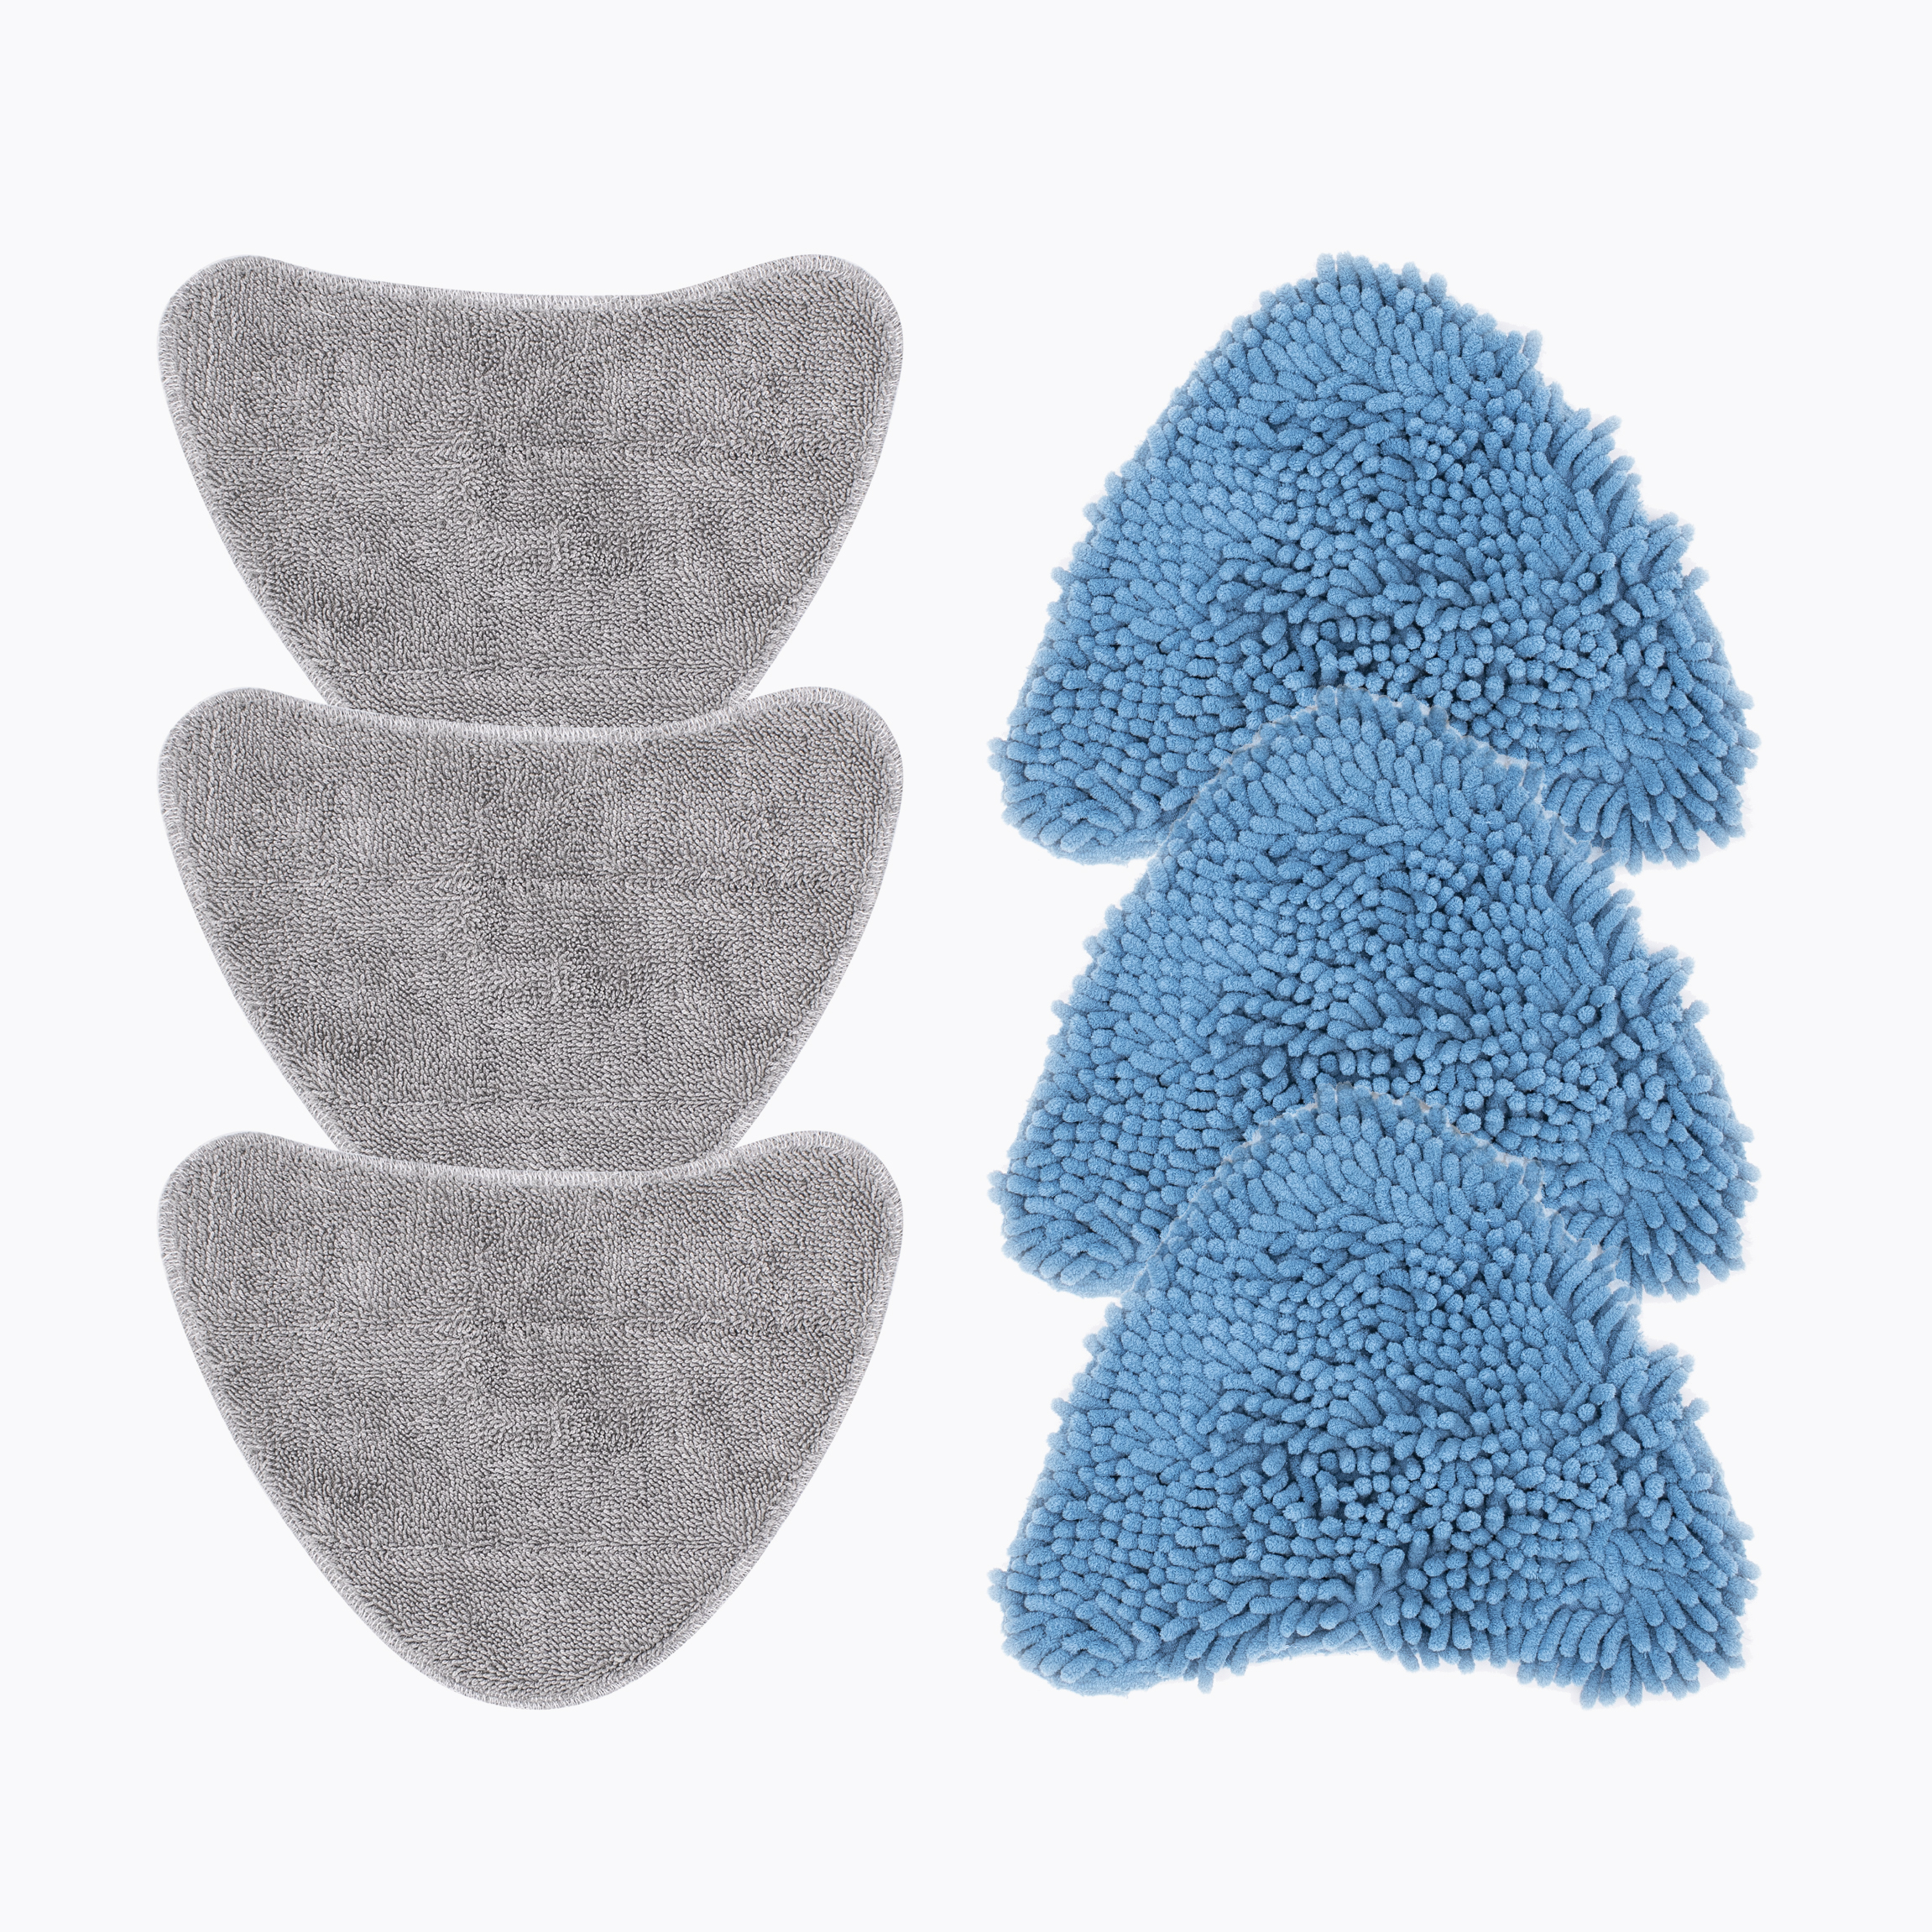 Steam Mop Replacement Pads compatible with VAX, shark etc